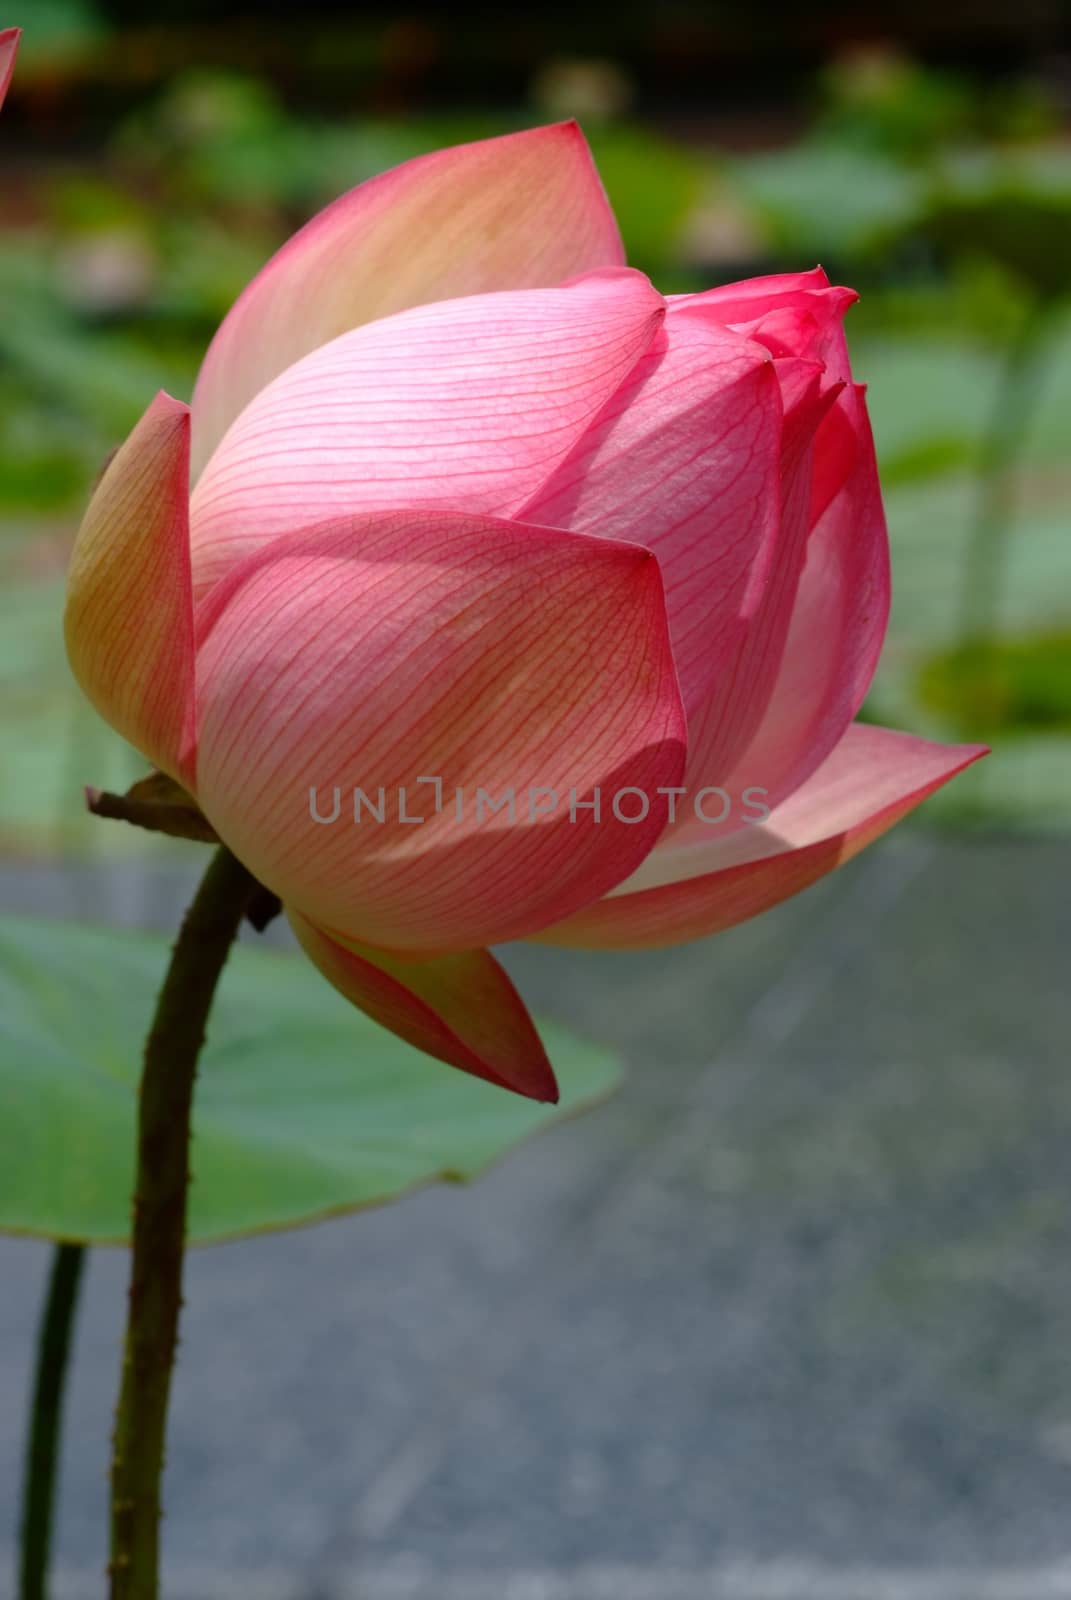 Lotus flower, rare flower. Ancient flower. Symbol of purity. Symbol of Buddhism, Nelumbo, Lotus orehonosny, Species listed in the Red book, Nelumbo nucifera, a Plant in of Asia and Orient